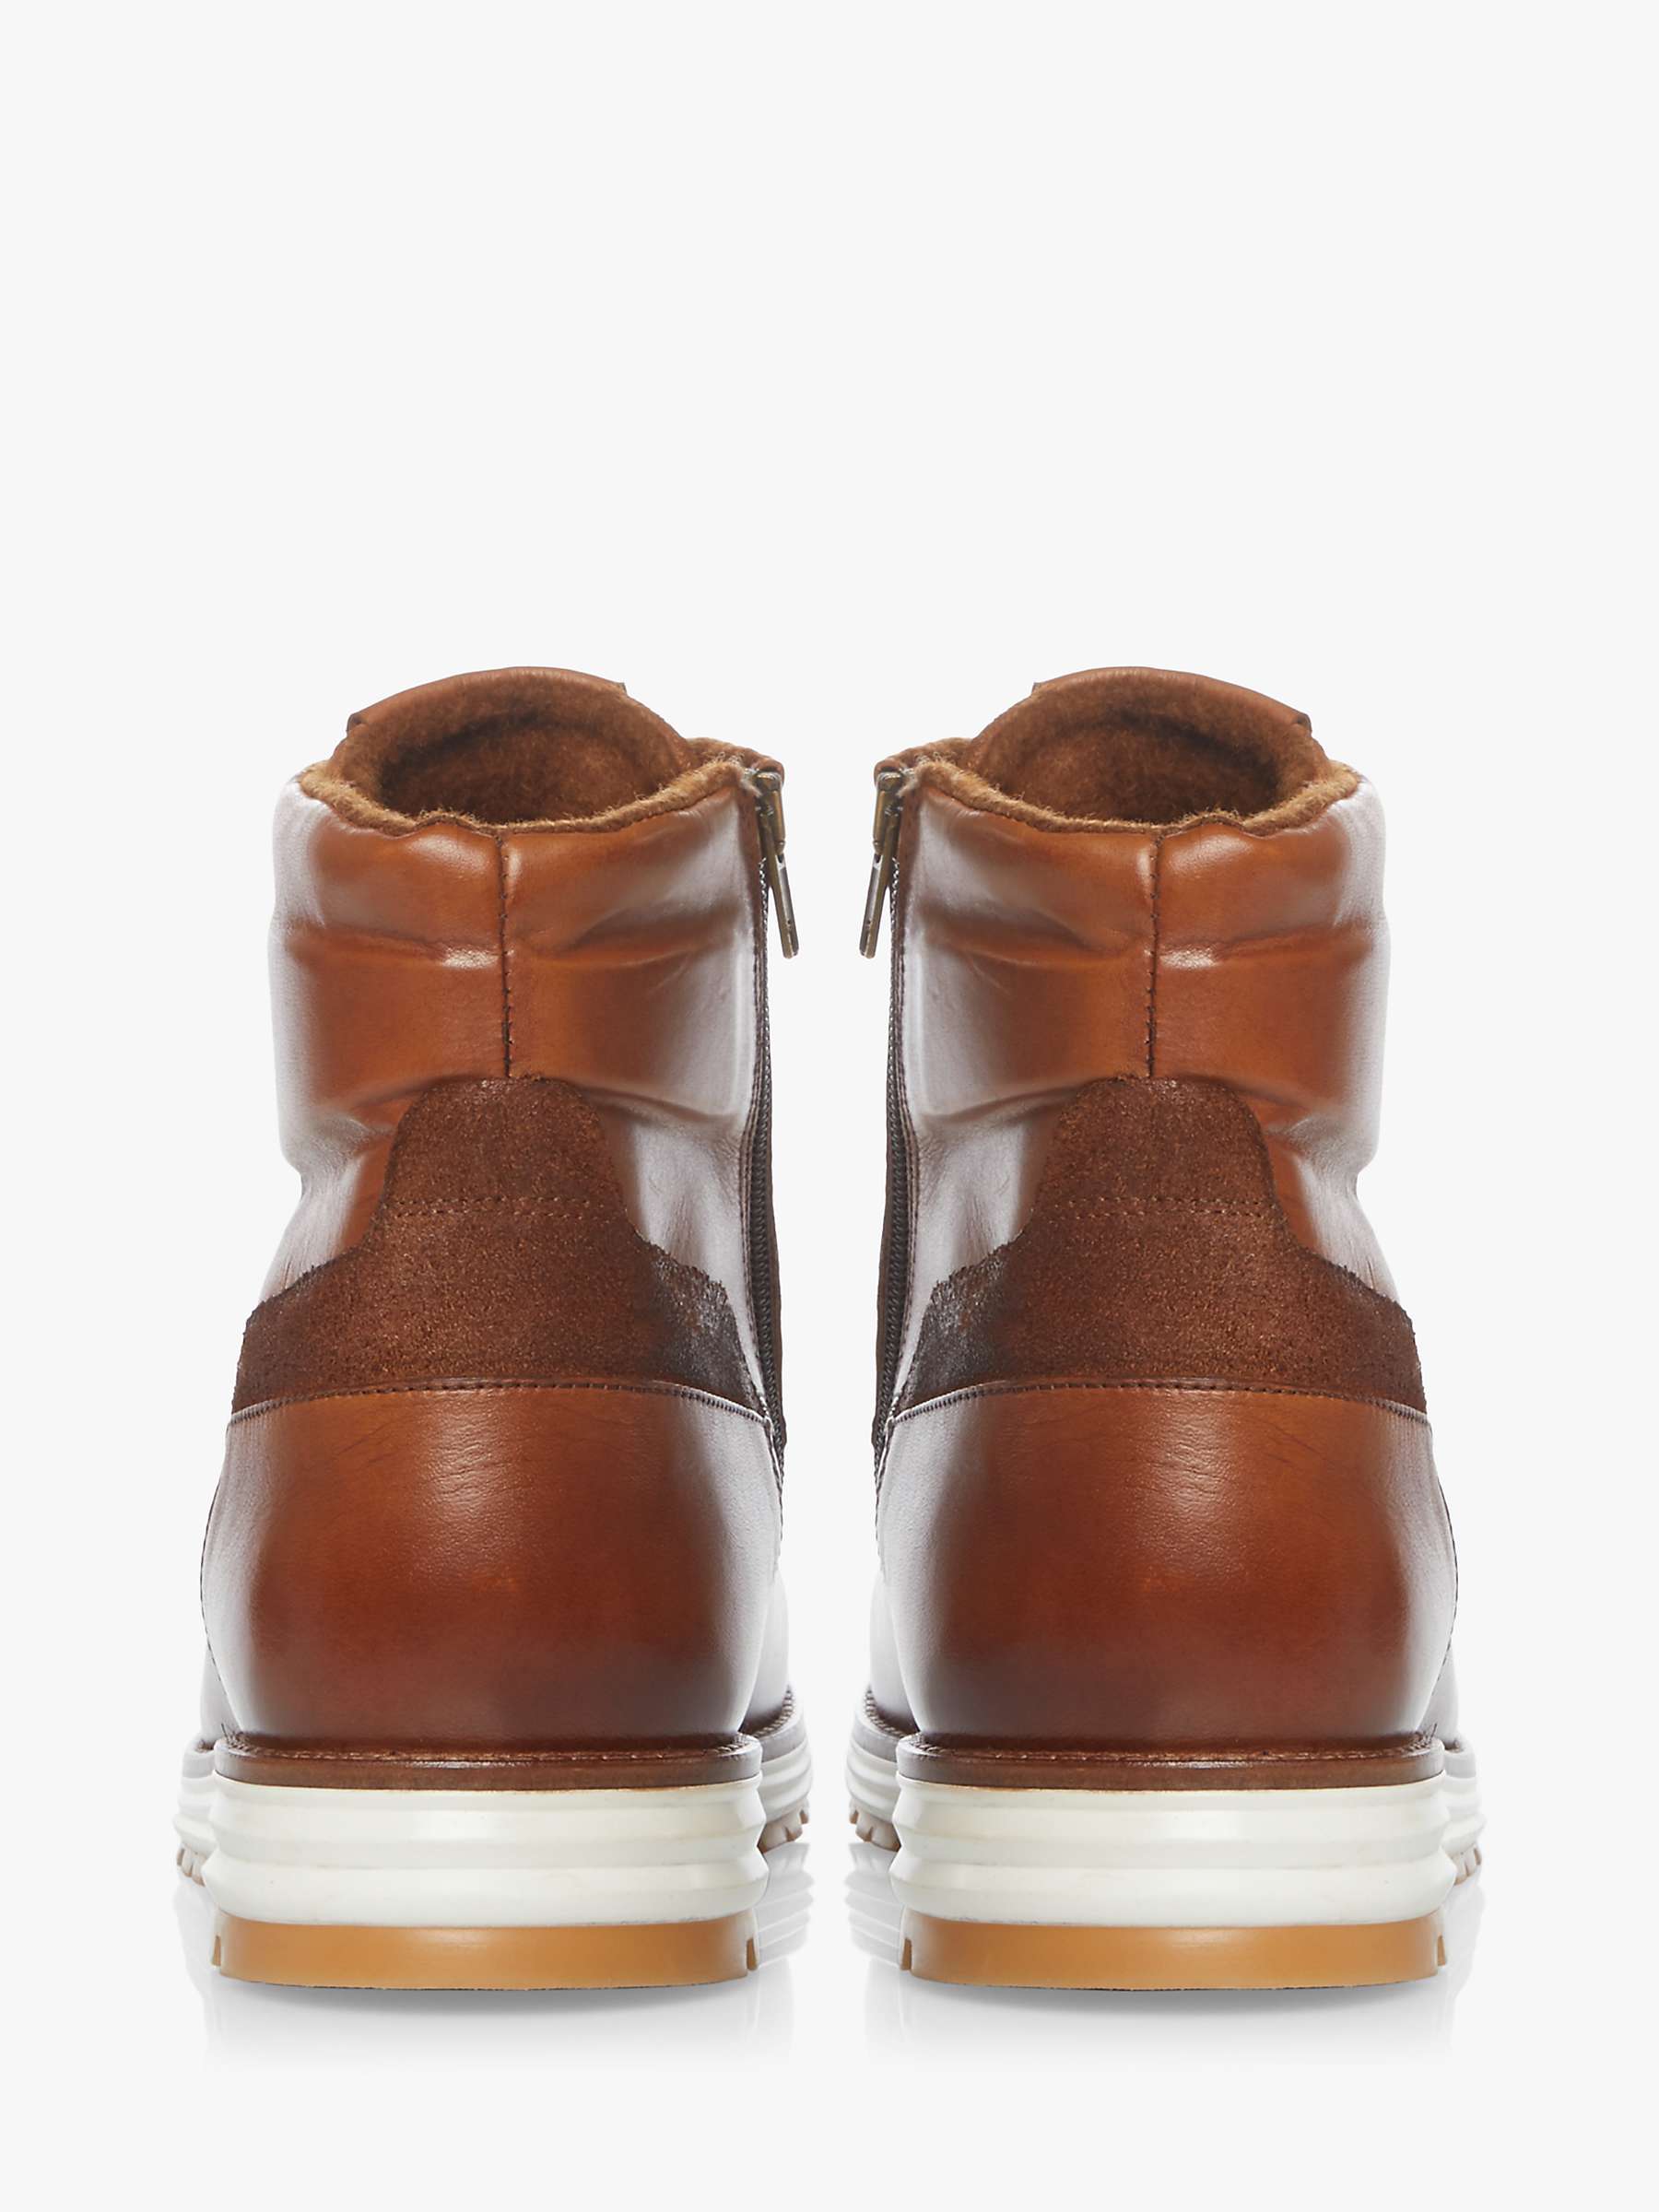 Buy Dune Catchy Casual Wedge Hiker Boots Online at johnlewis.com